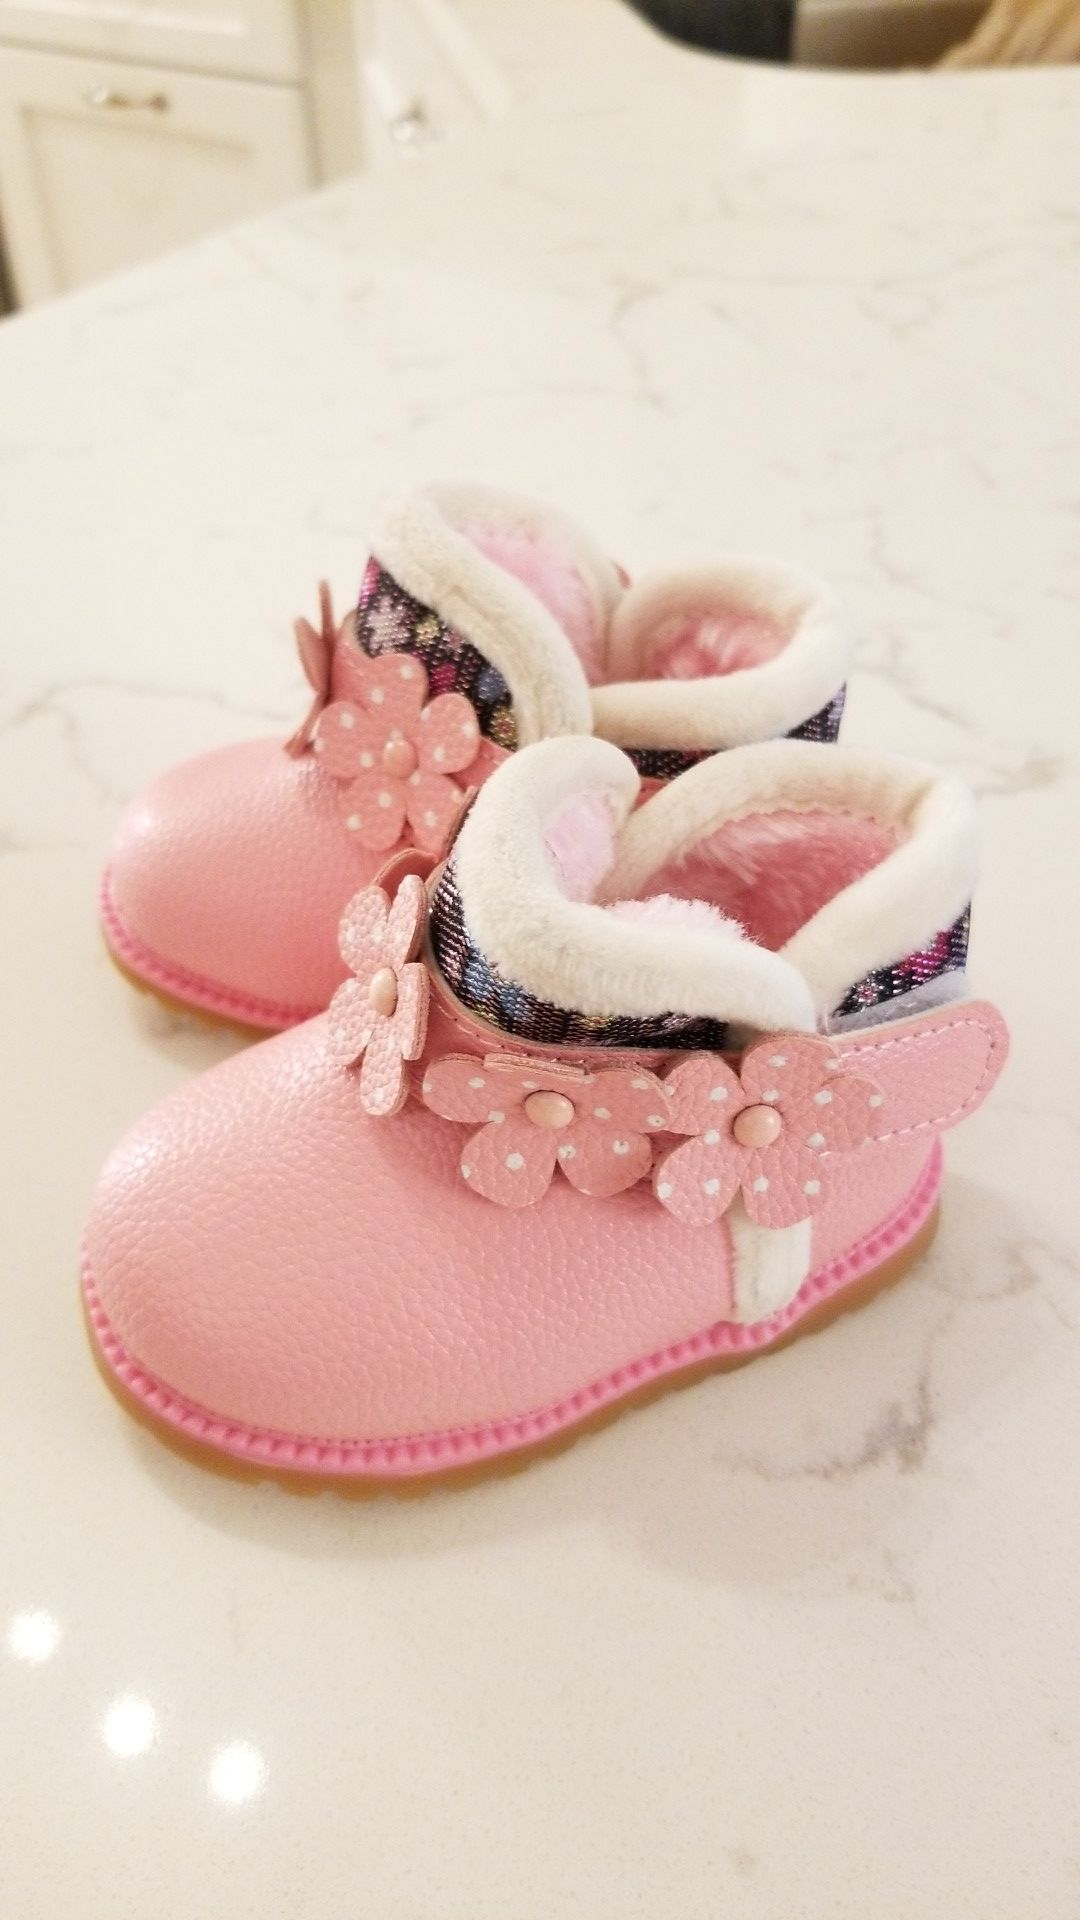 Baby girls size 4 pink boots with faux fur lining